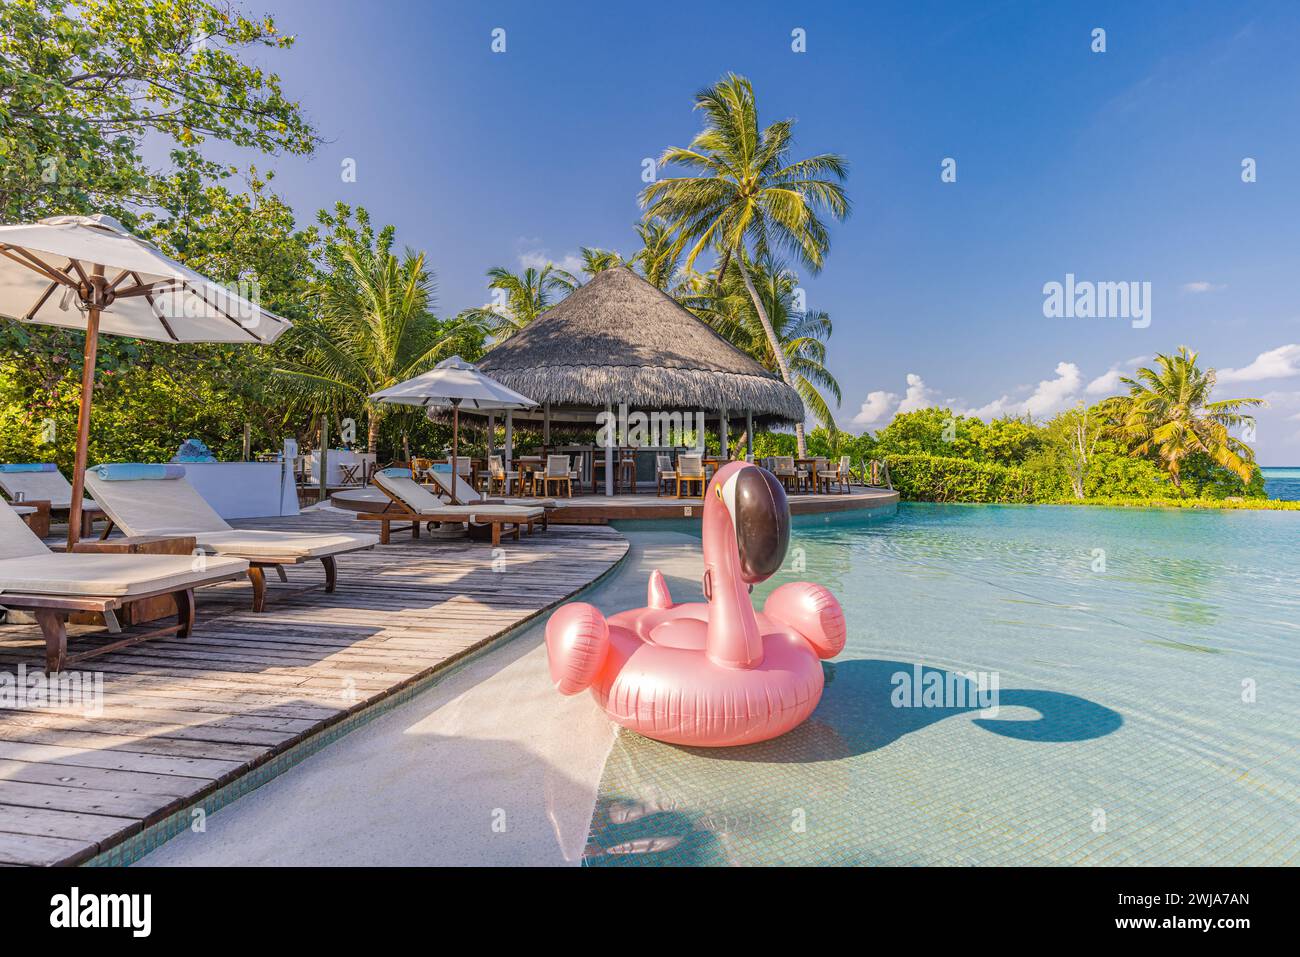 Summer tourism swimming pool inflatable pink flamingo, luxury resort hotel poolside. Happy cloudy sky, tropical paradise island infinity pool sea view Stock Photo